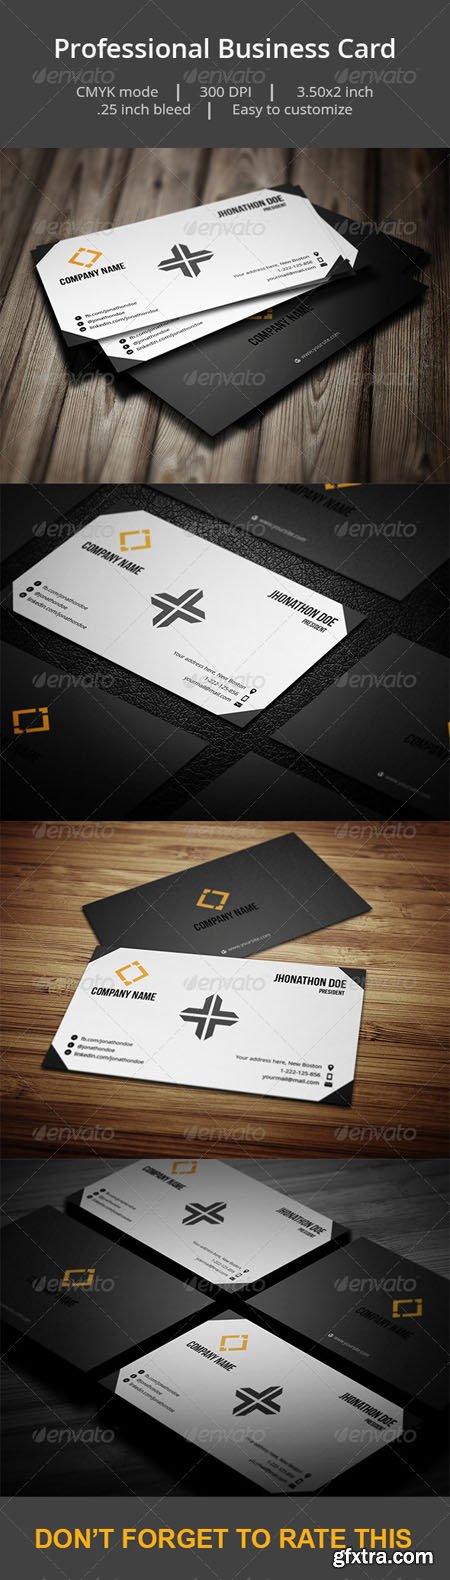 GraphicRiver - Professional Business card 6951771